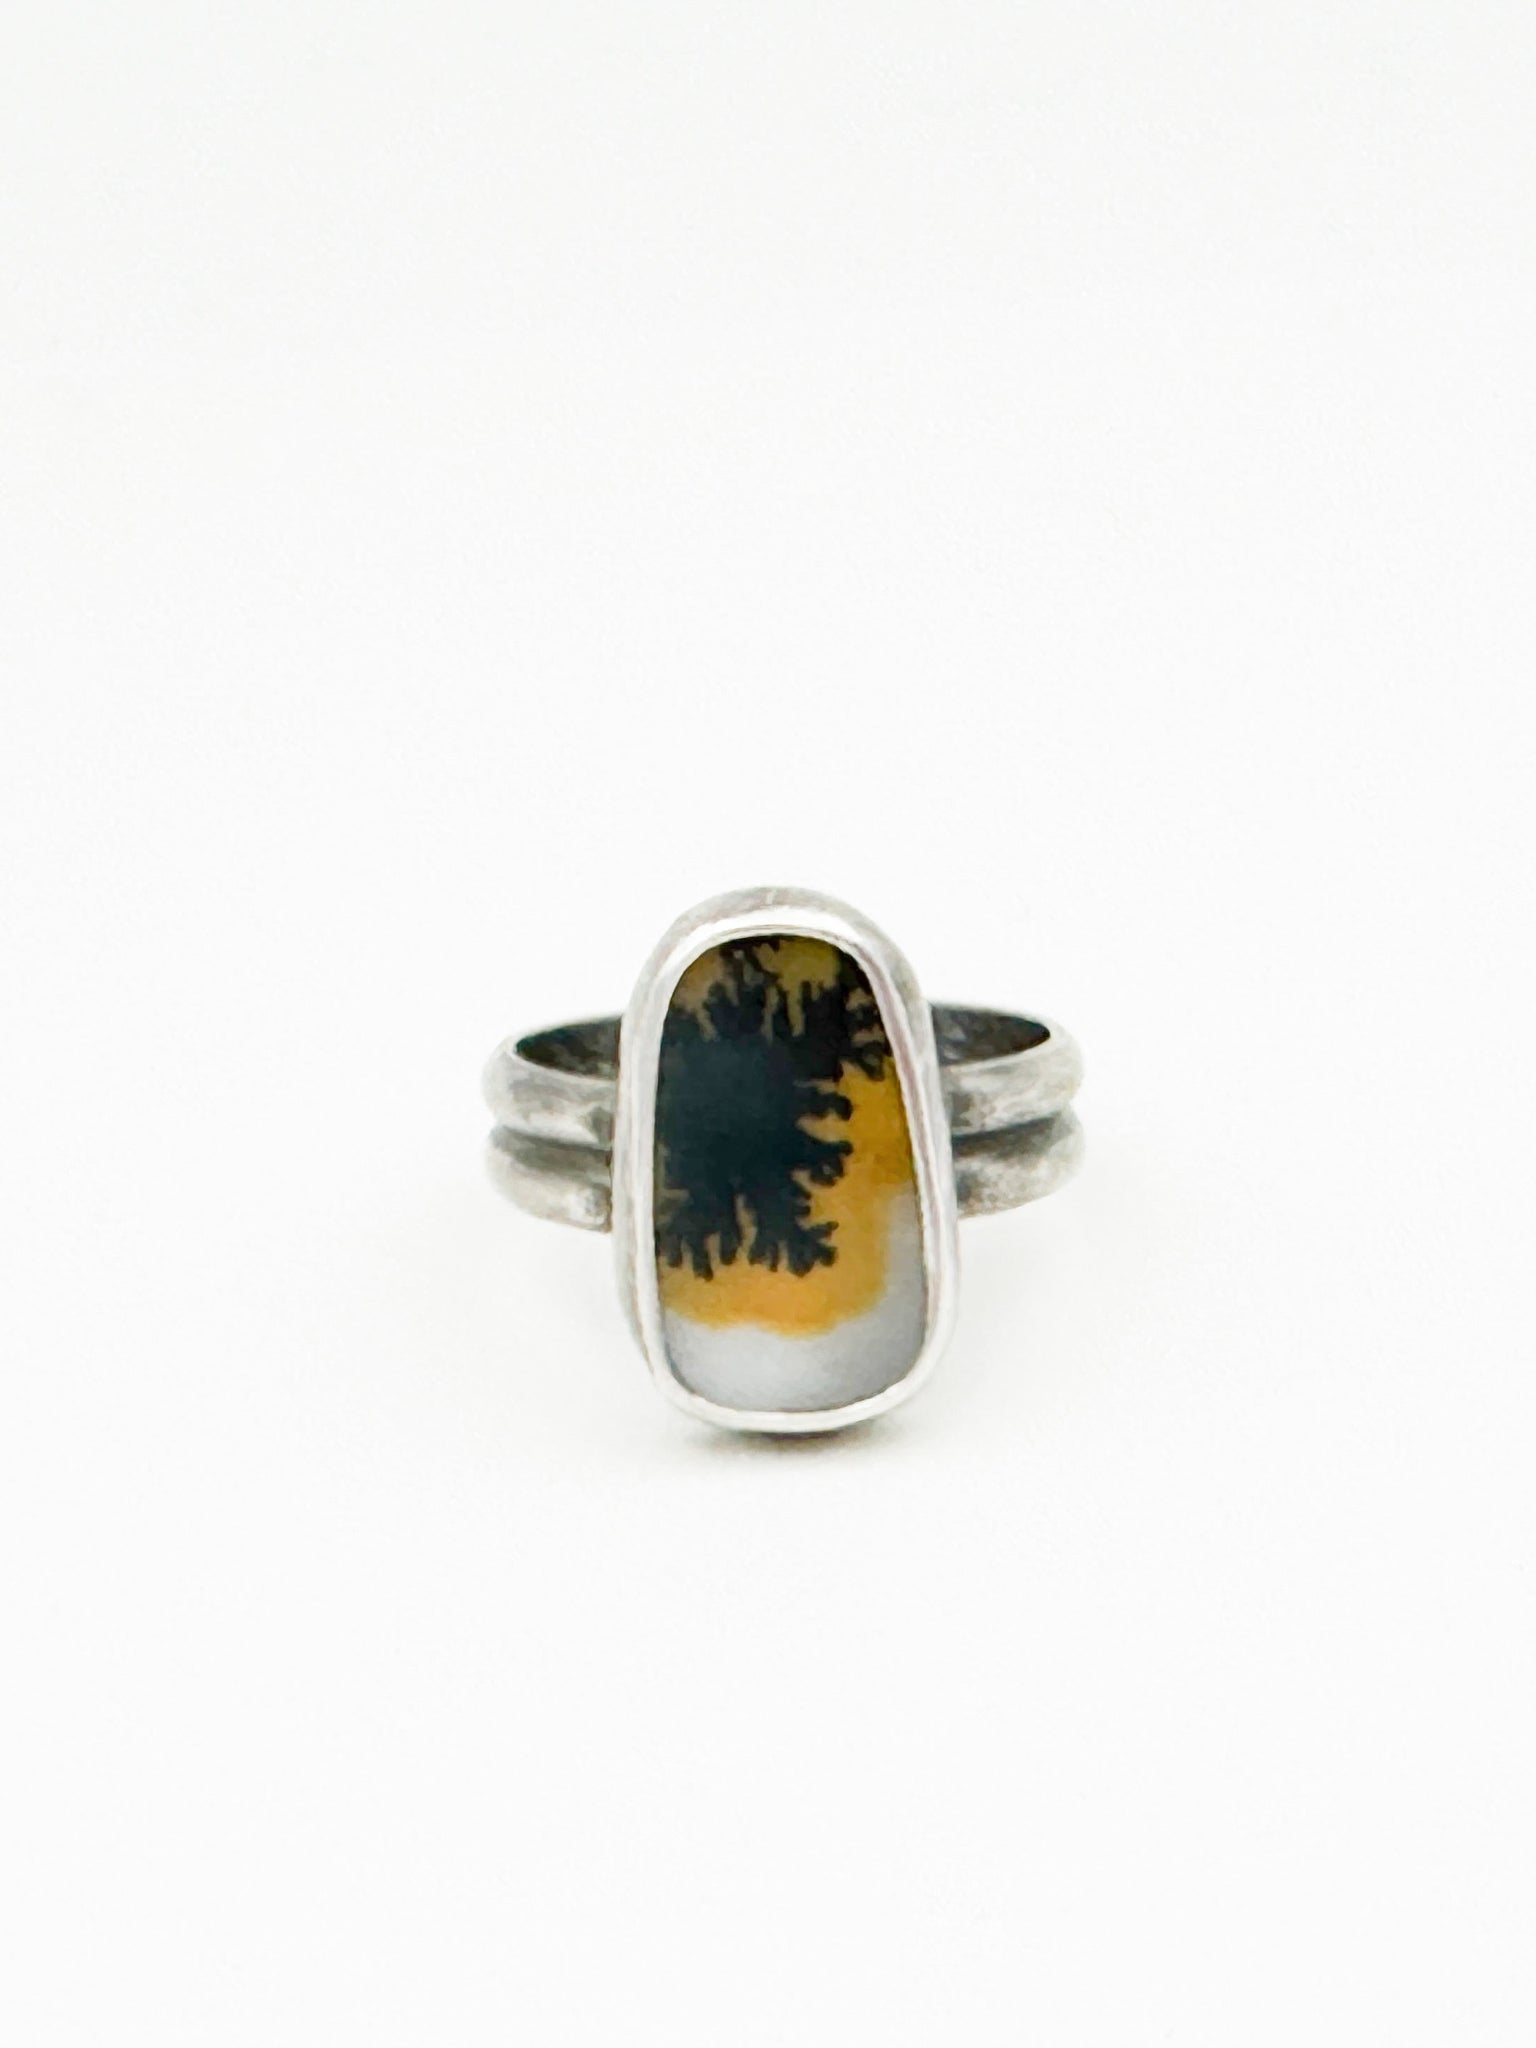 Dendritic Agate and Sterling Silver Ring Size 8.25